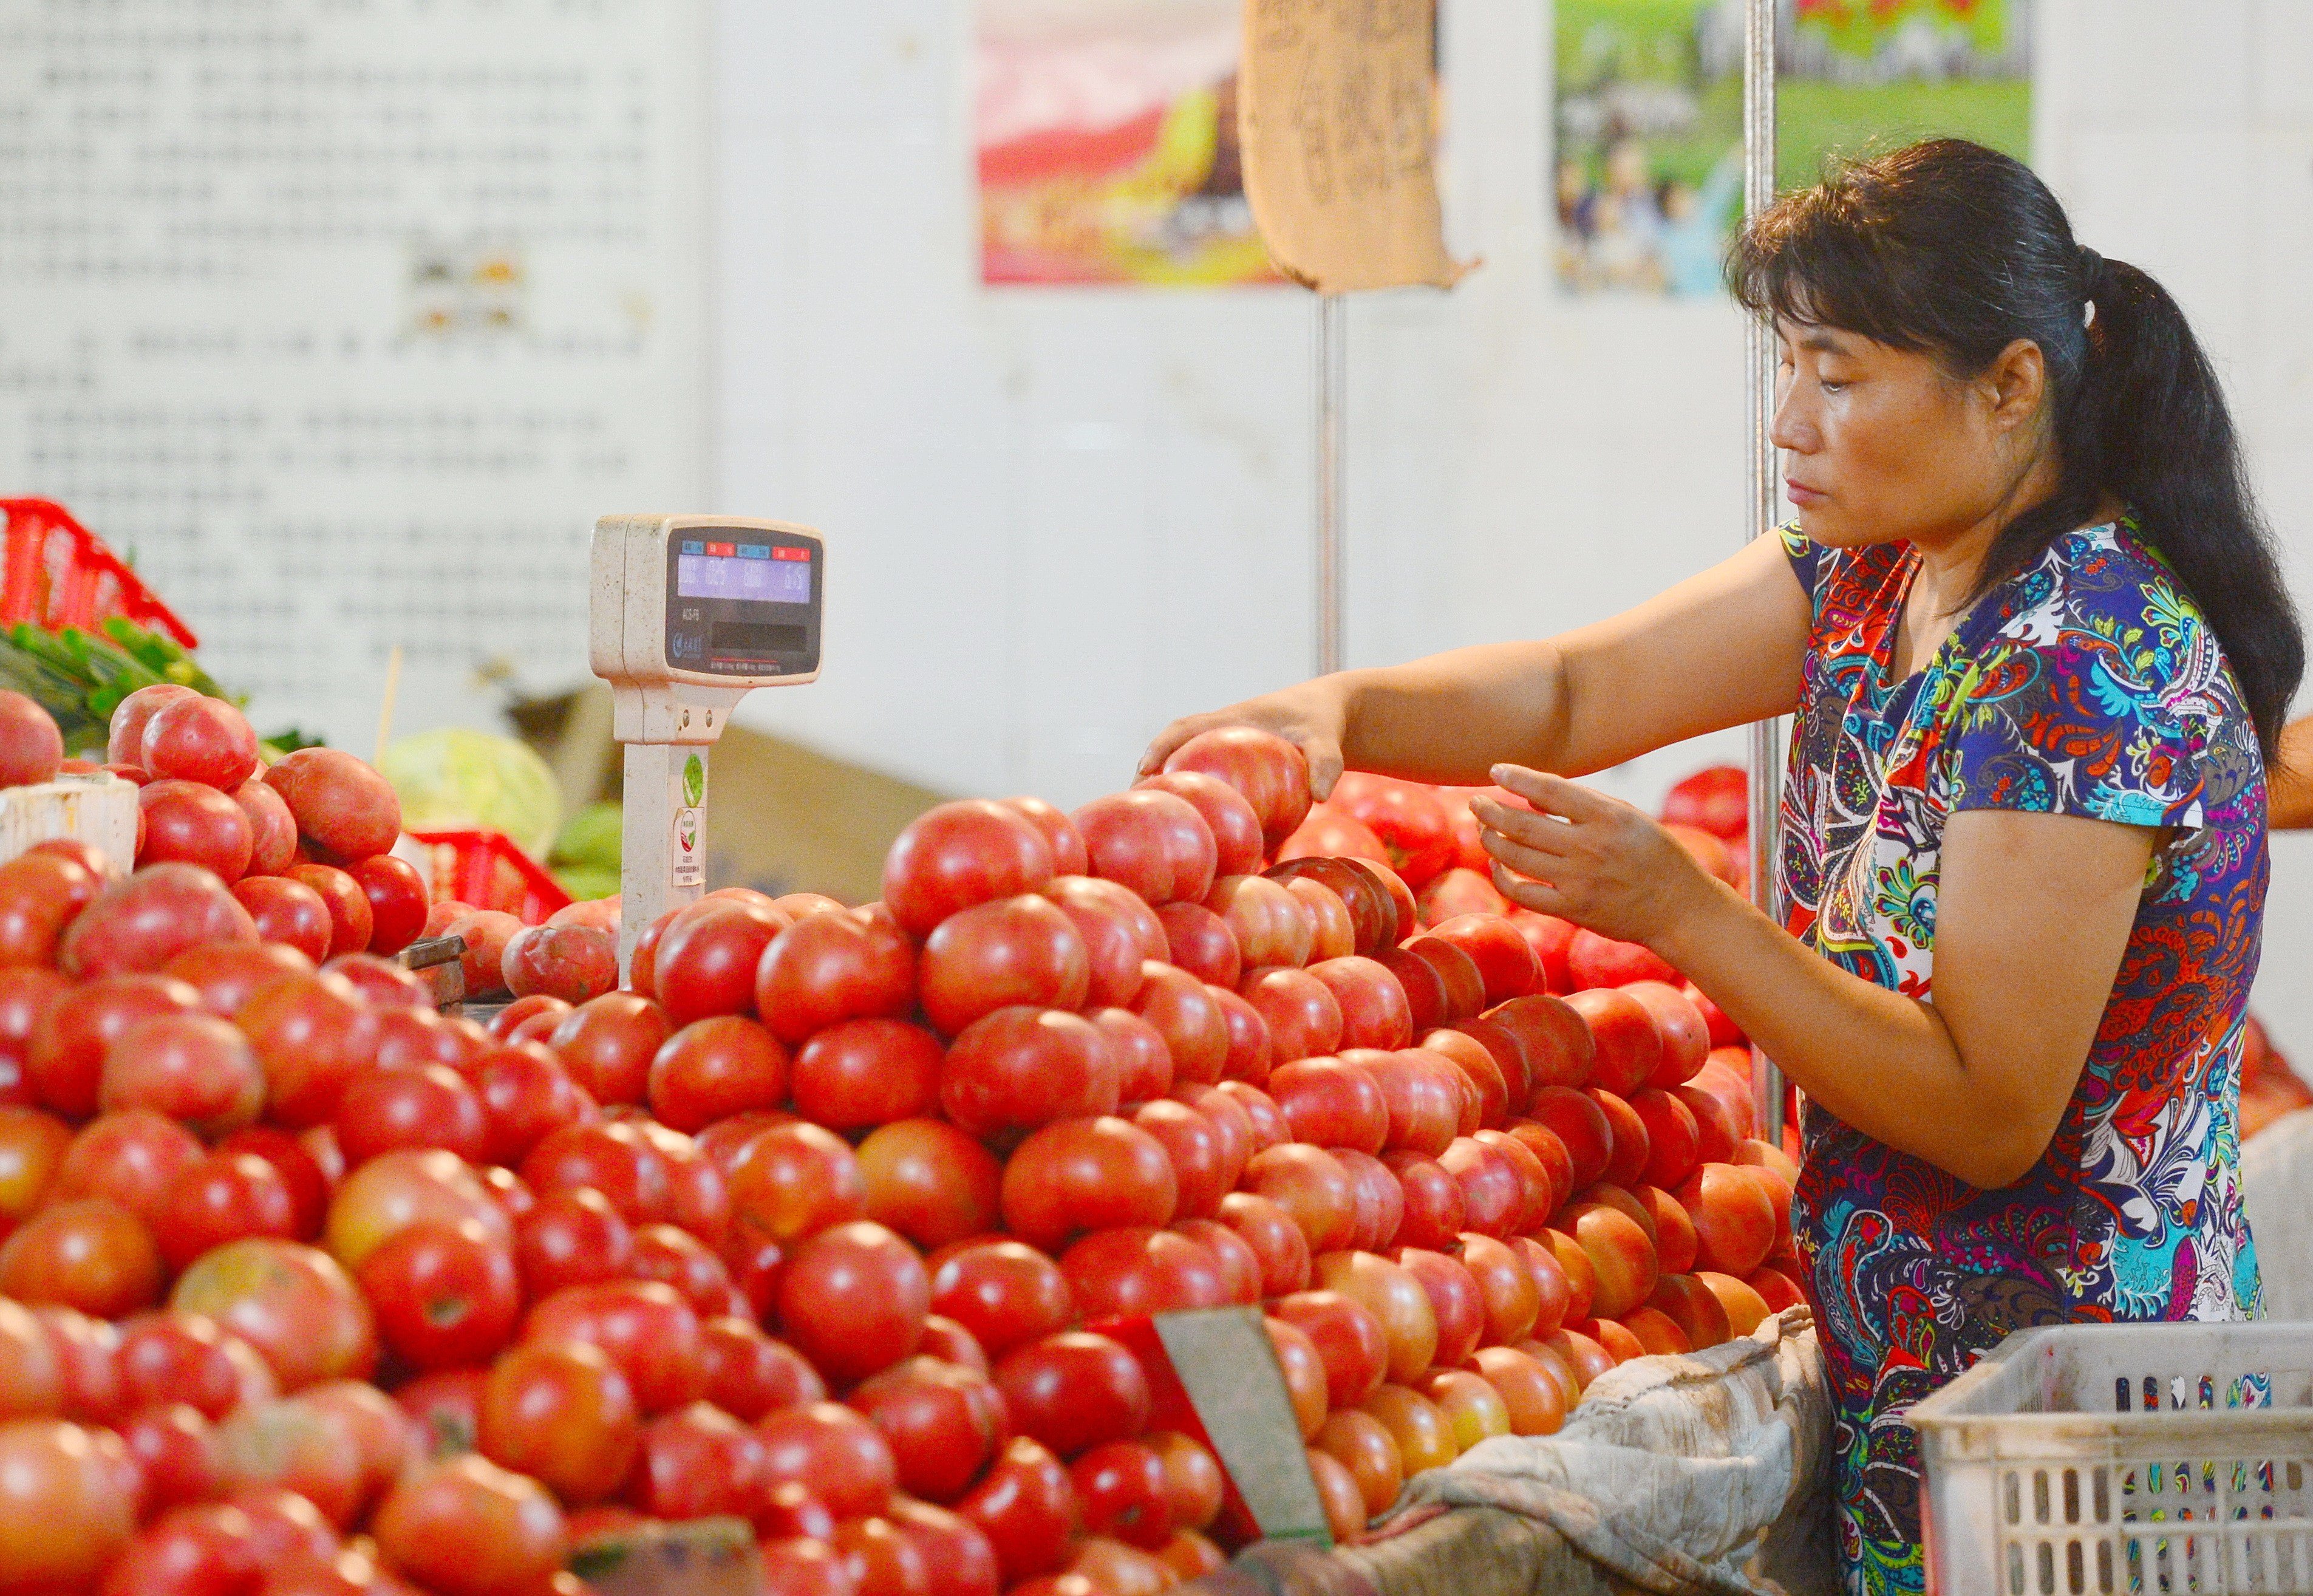 Food prices rose 0.7 per cent year on year in July. Photo: Xinhua